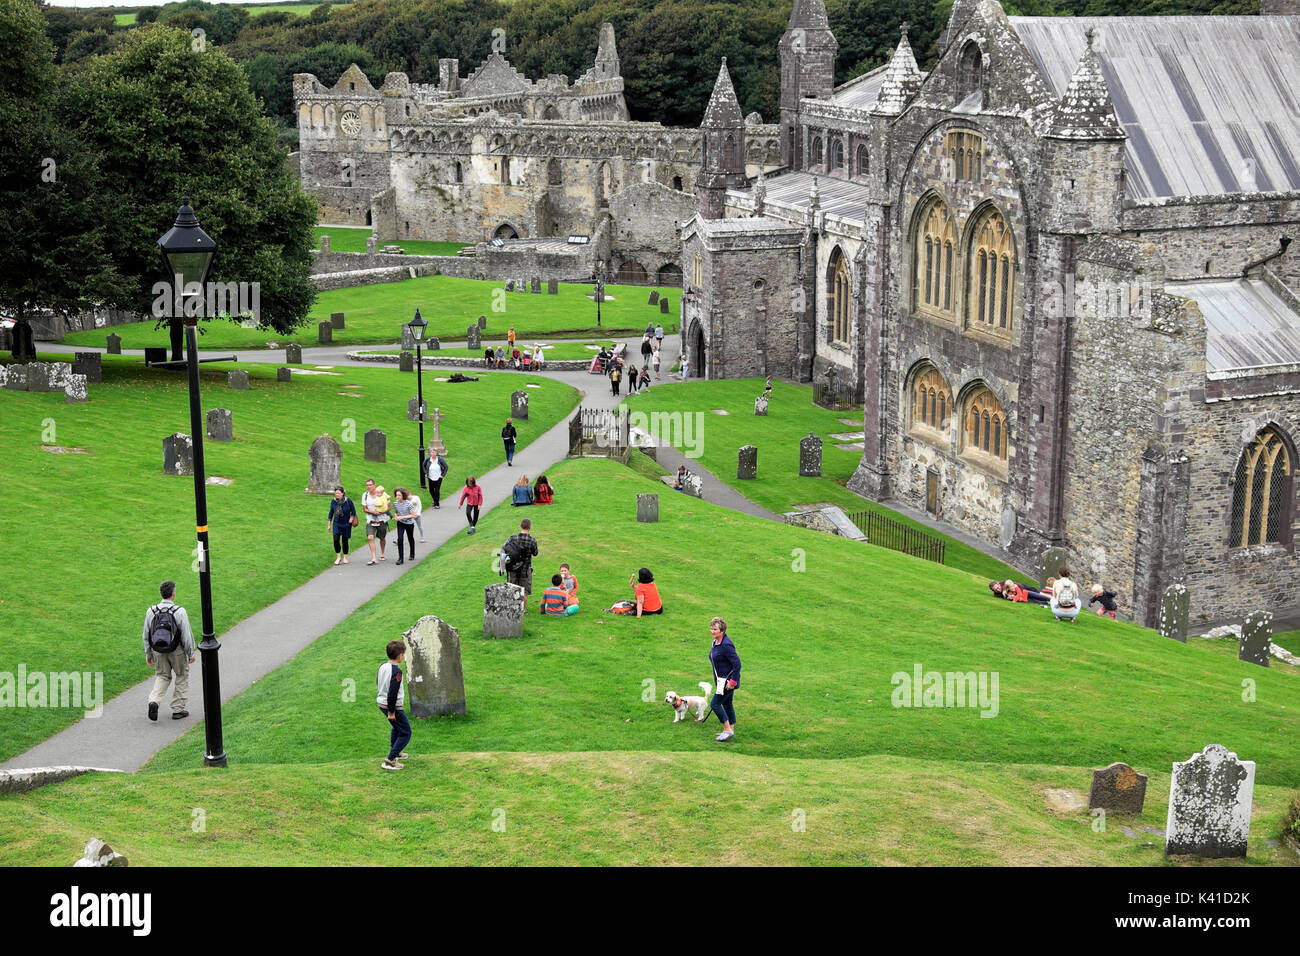 People visitors walking on the lawn in summer outside St. David's Cathedral, Pembrokeshire, Wales UK  KATHY DEWITT Stock Photo